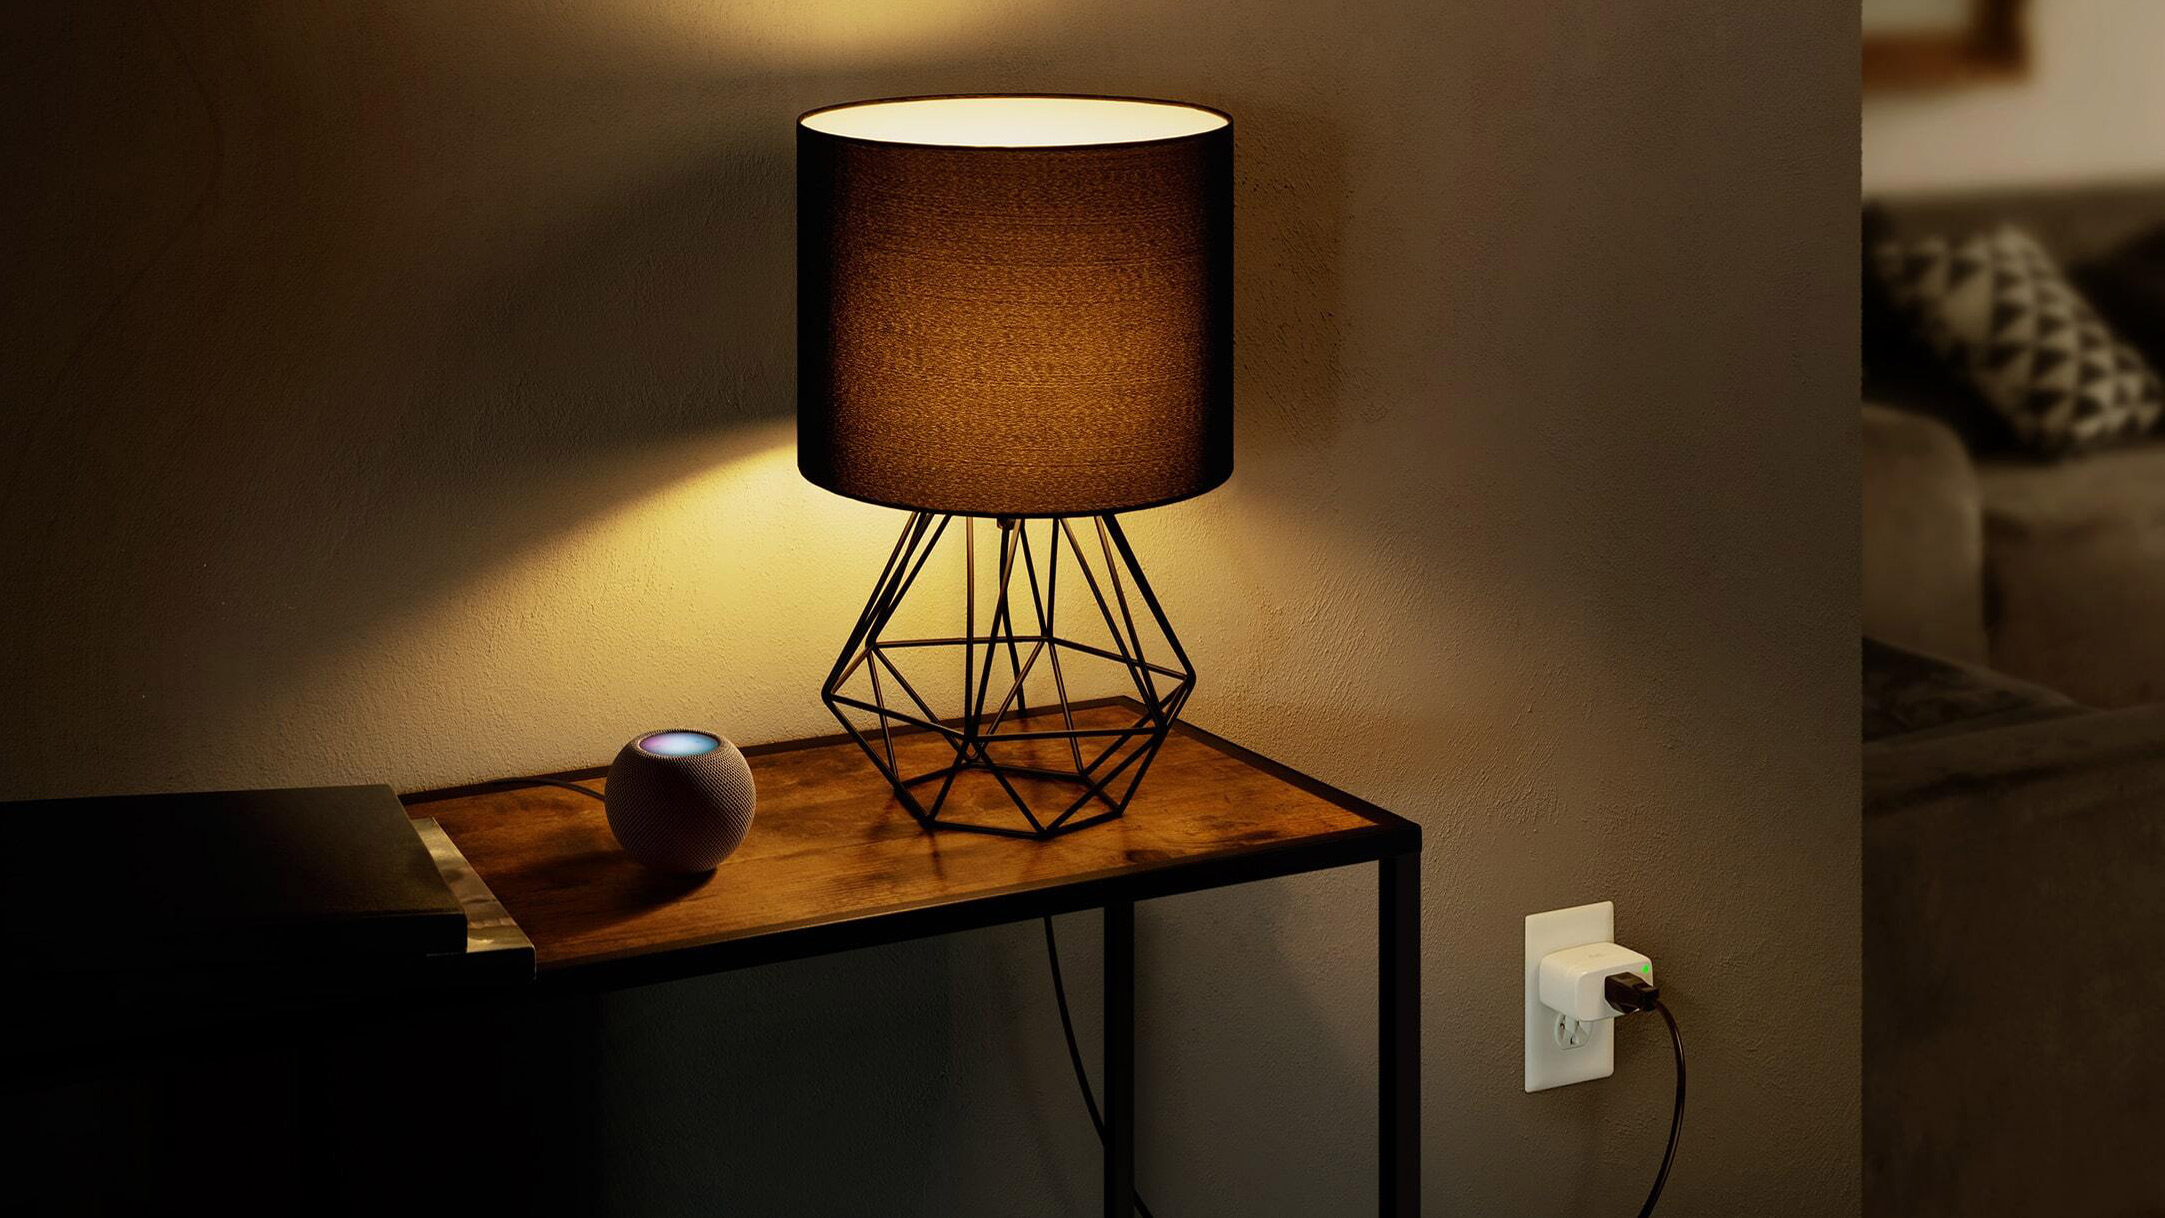 Eve Energy smart plug in an electrical socket with a lamp and HomePod Mini on a table above